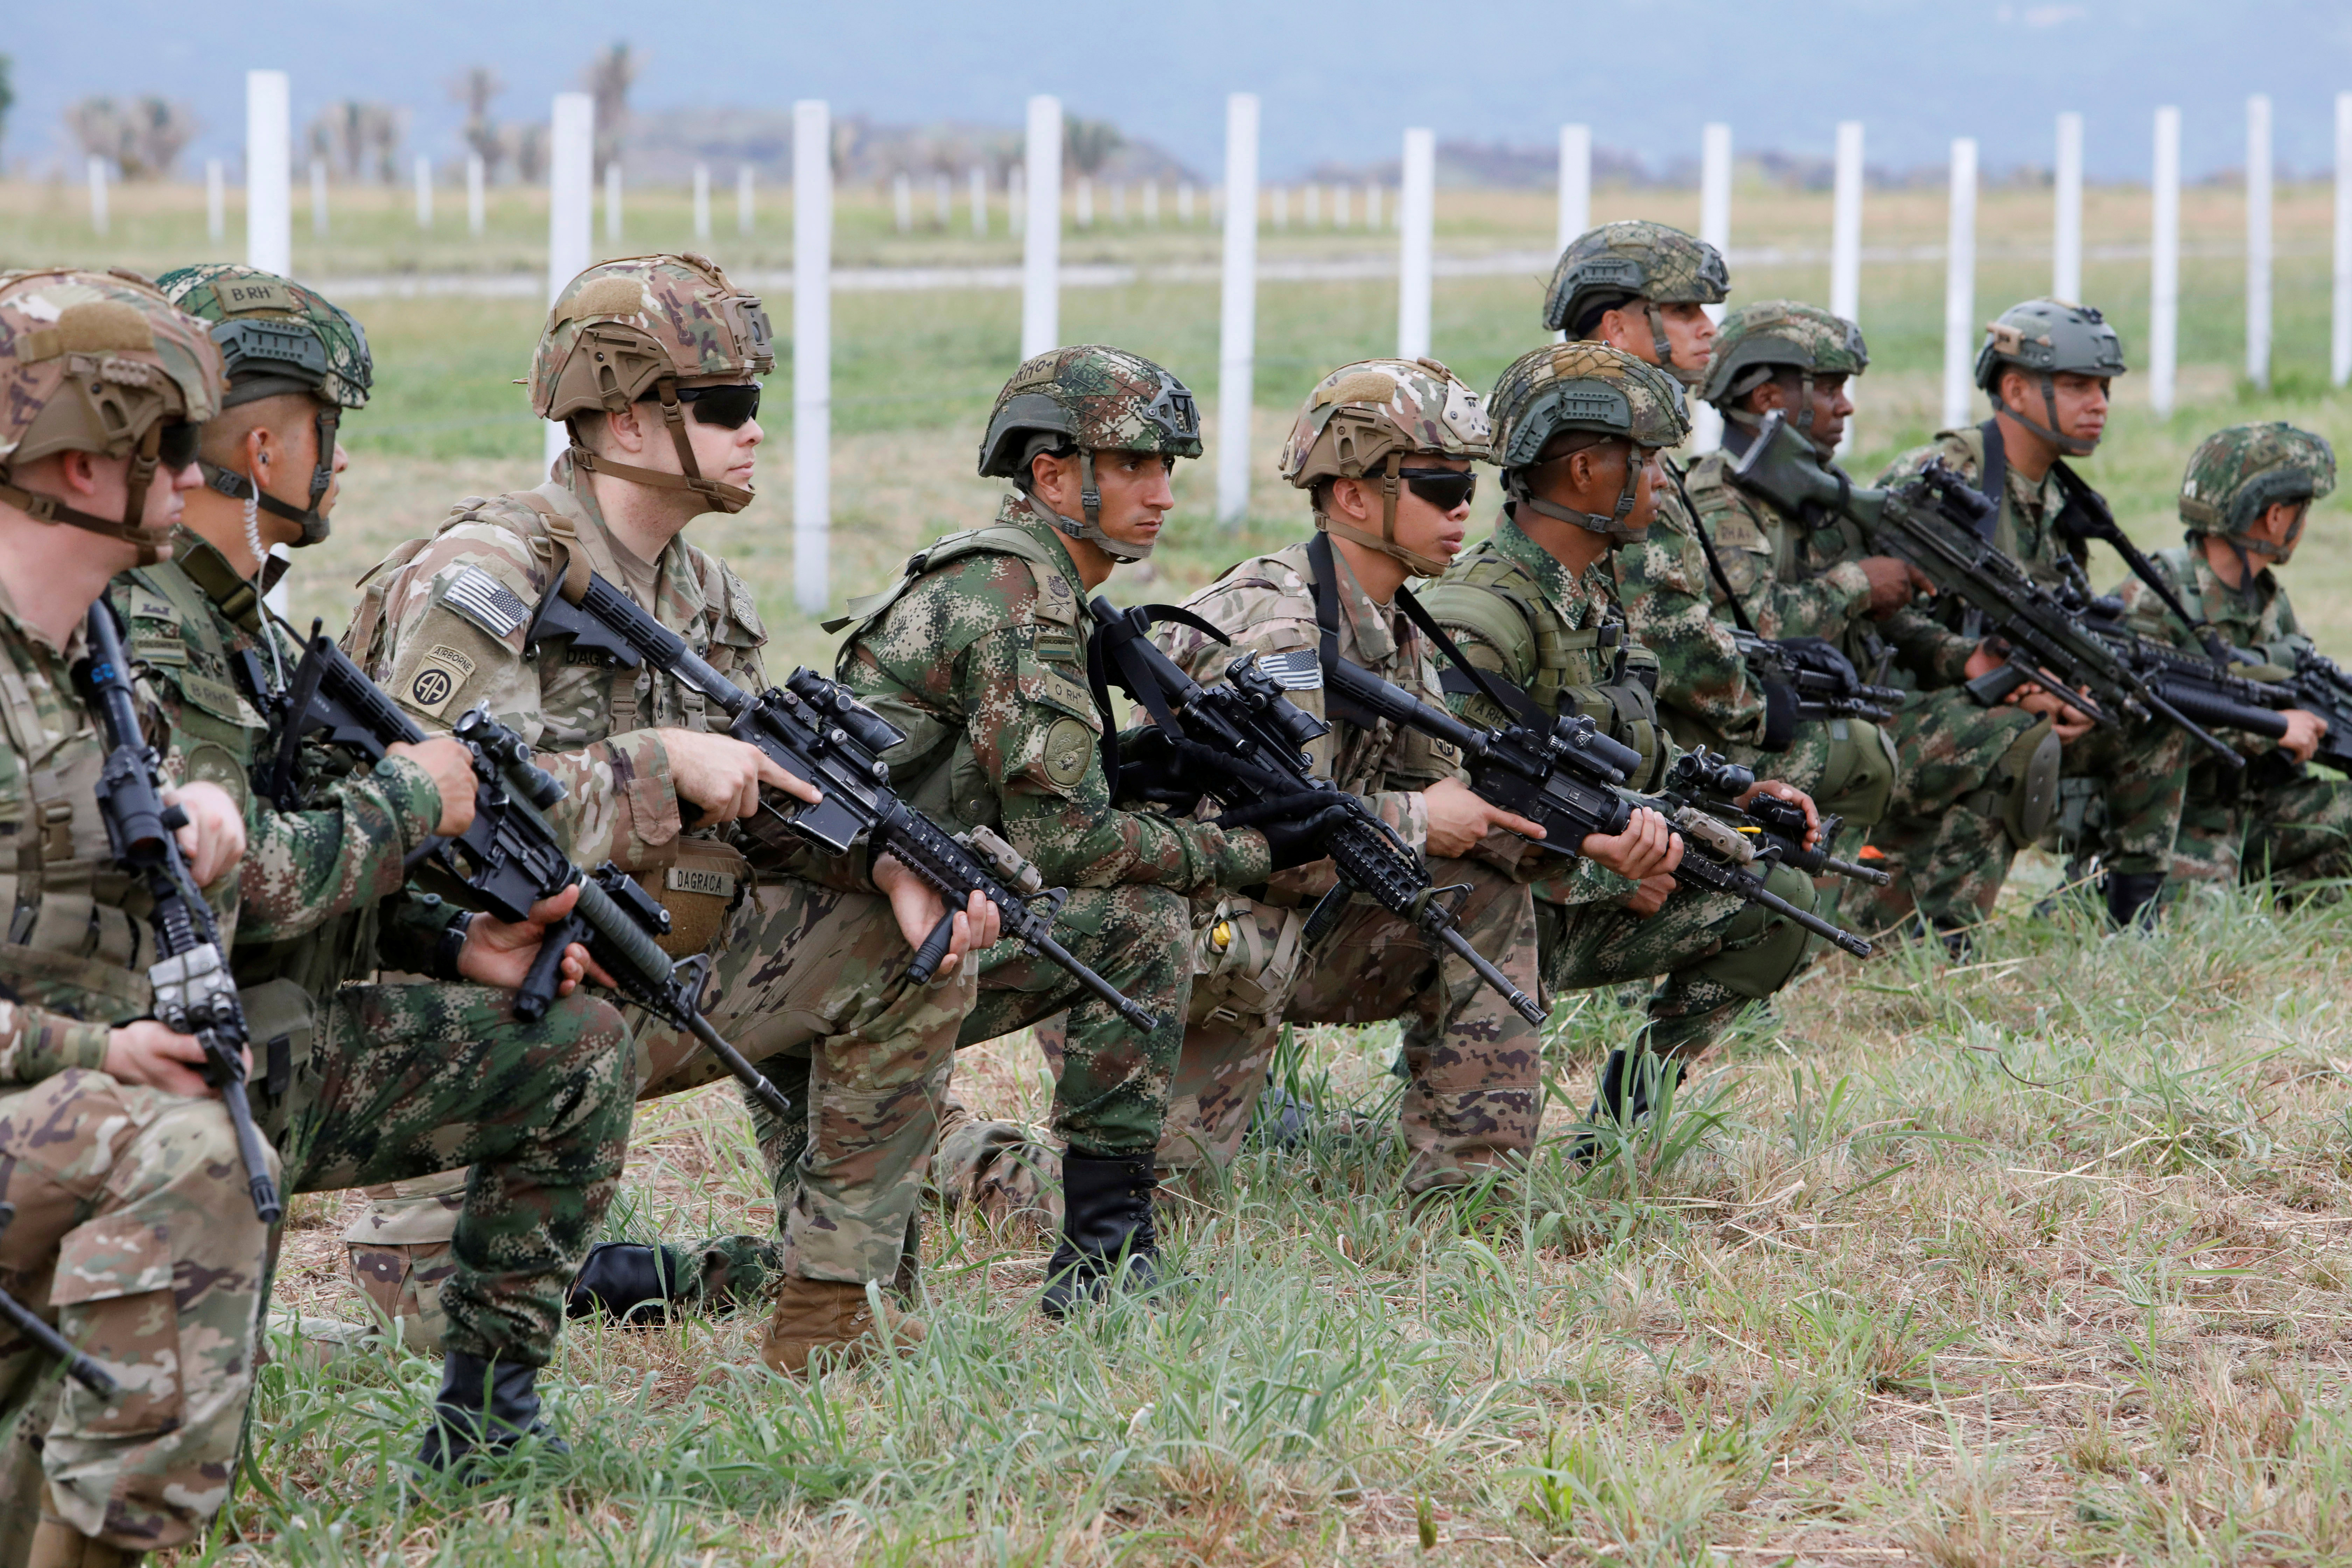 Colombian and U.S. paratroopers in combined exercise at the Tolemaida military base in Colombia